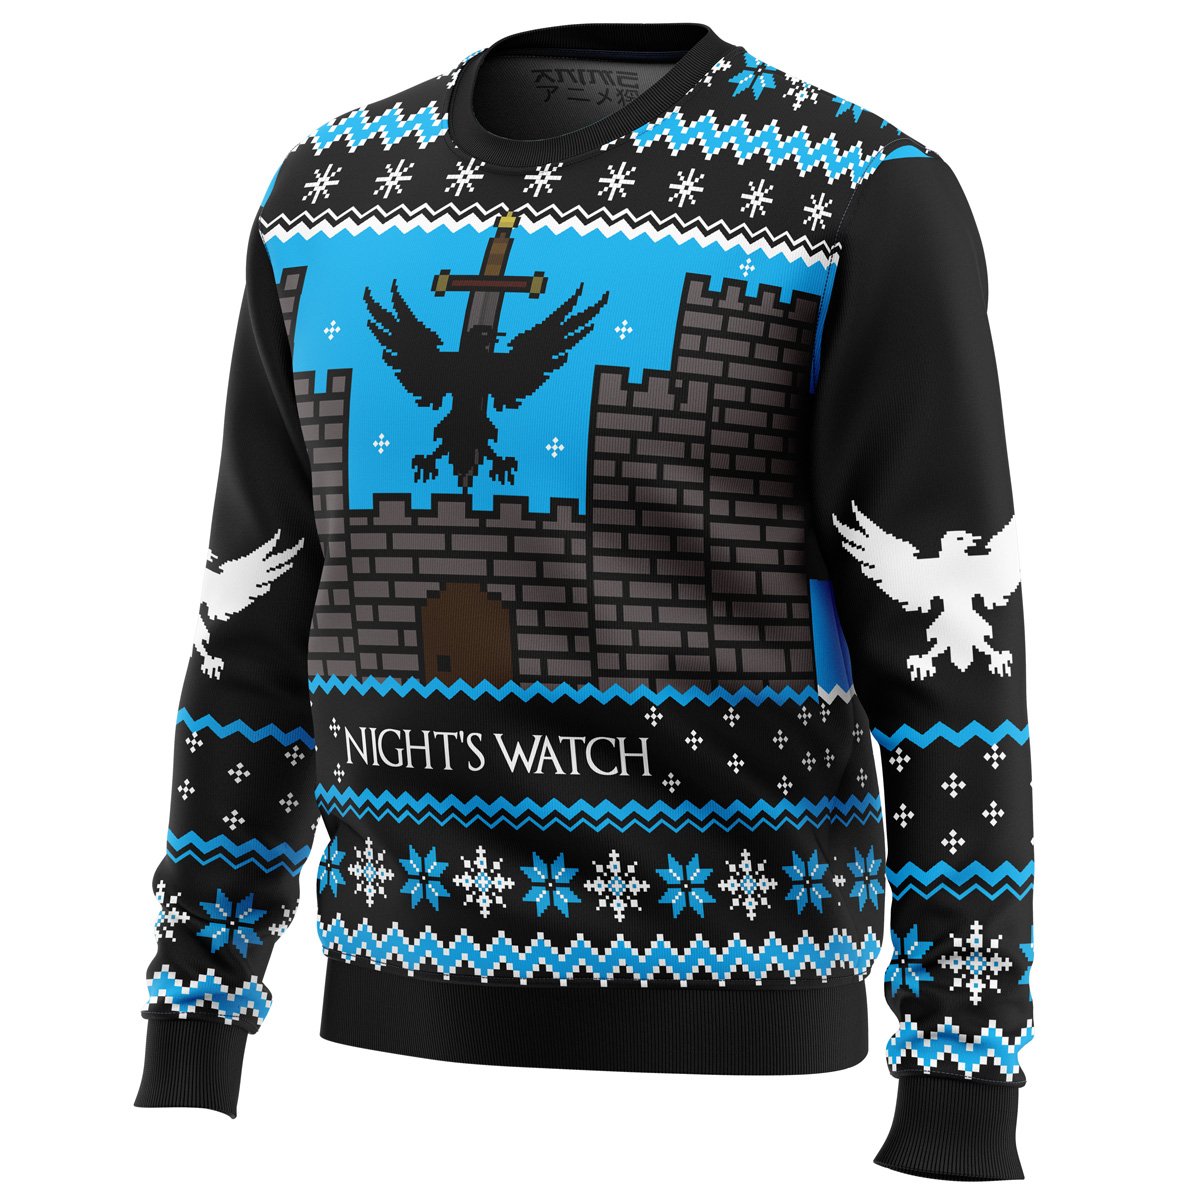 Game of Thrones Night's Watch Ugly Christmas Sweater